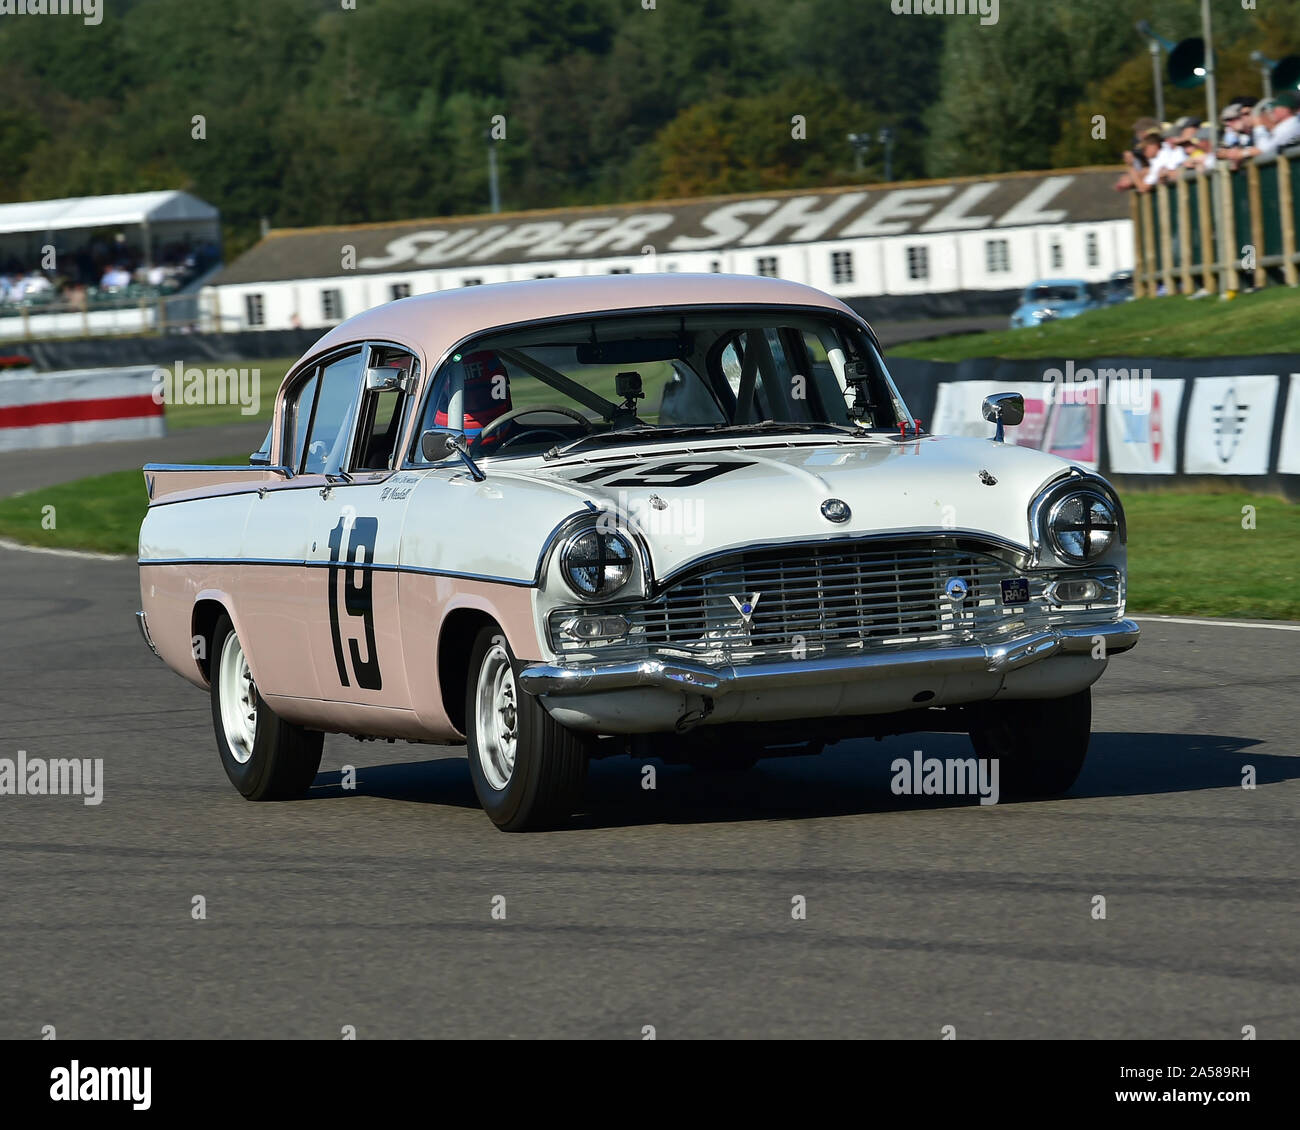 Tiff Needell, Chris Snowdon, Vauxhall PA Cresta, St Marys Trophy, production saloon cars, 1960 to 1966, Goodwood Revival 2019, September 2019, automob Stock Photo